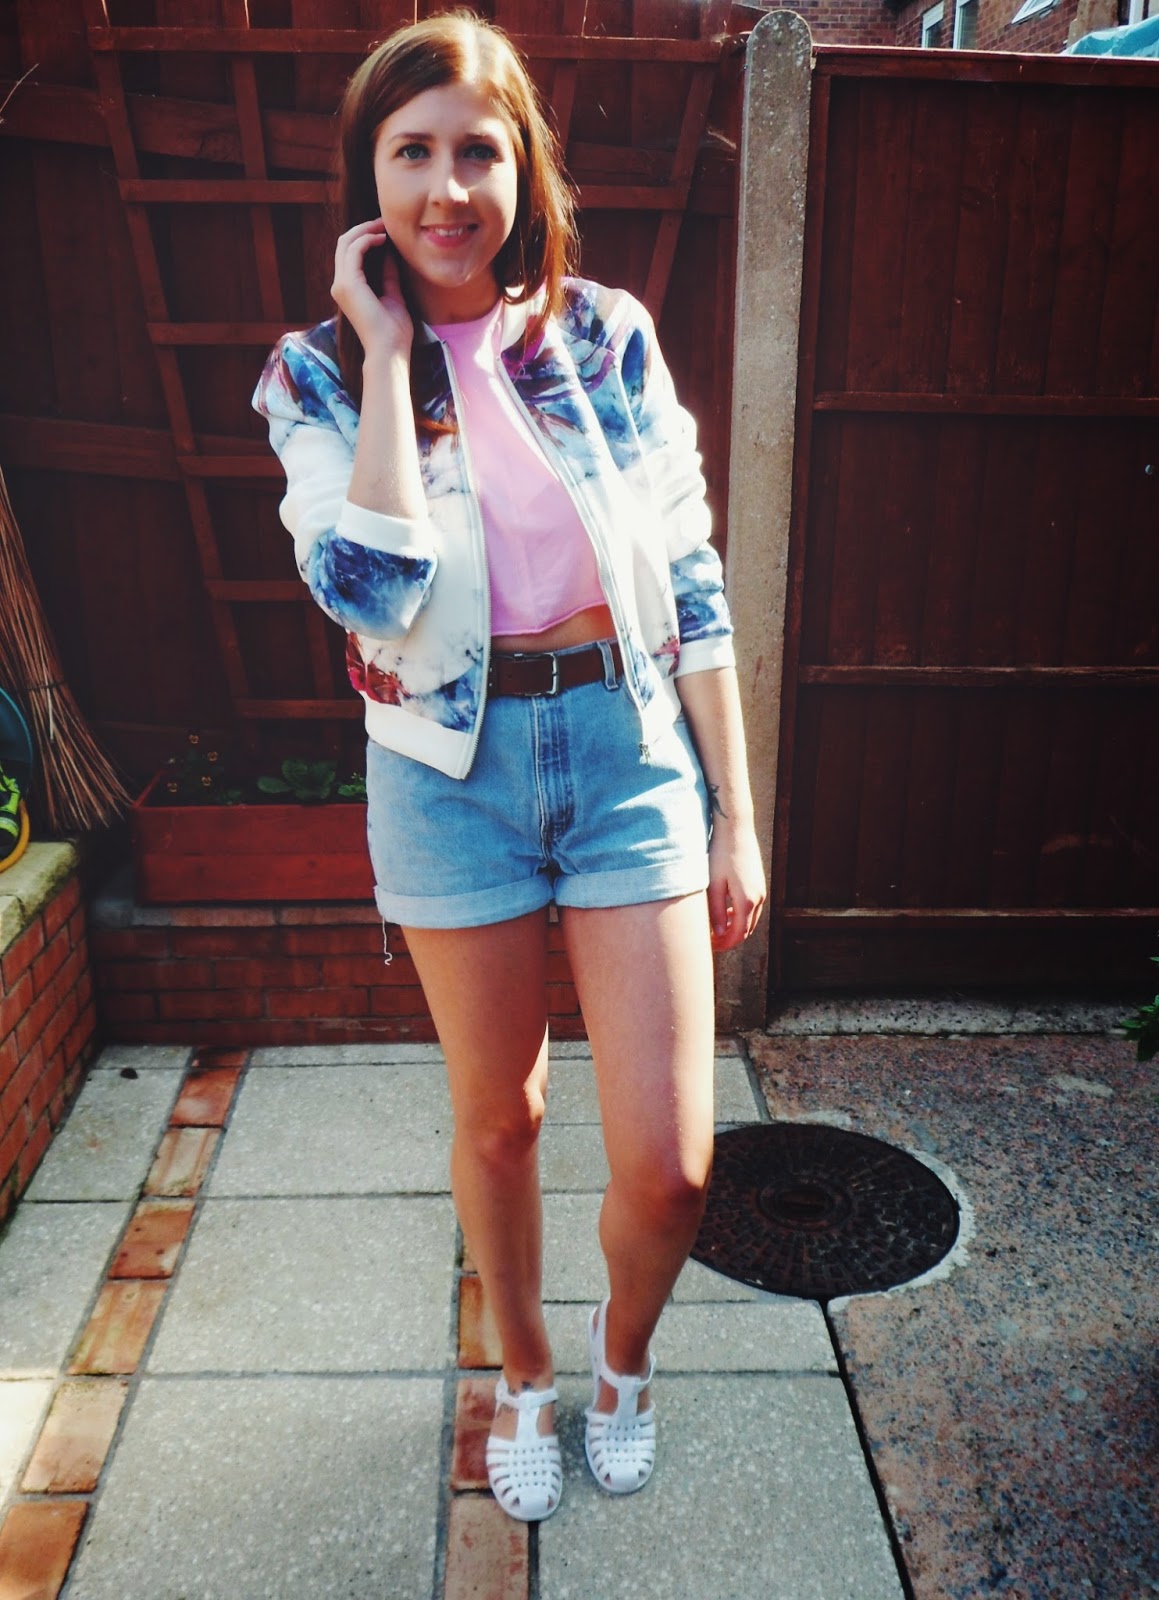 asseenonme, wiw, whatimwearing, missguided, bomberjacket, asos, fbloggers, fblogger, whatibought, levishorts, momshorts, ebay, jellyshoes, newlook, summer, ootd, outfitoftheday